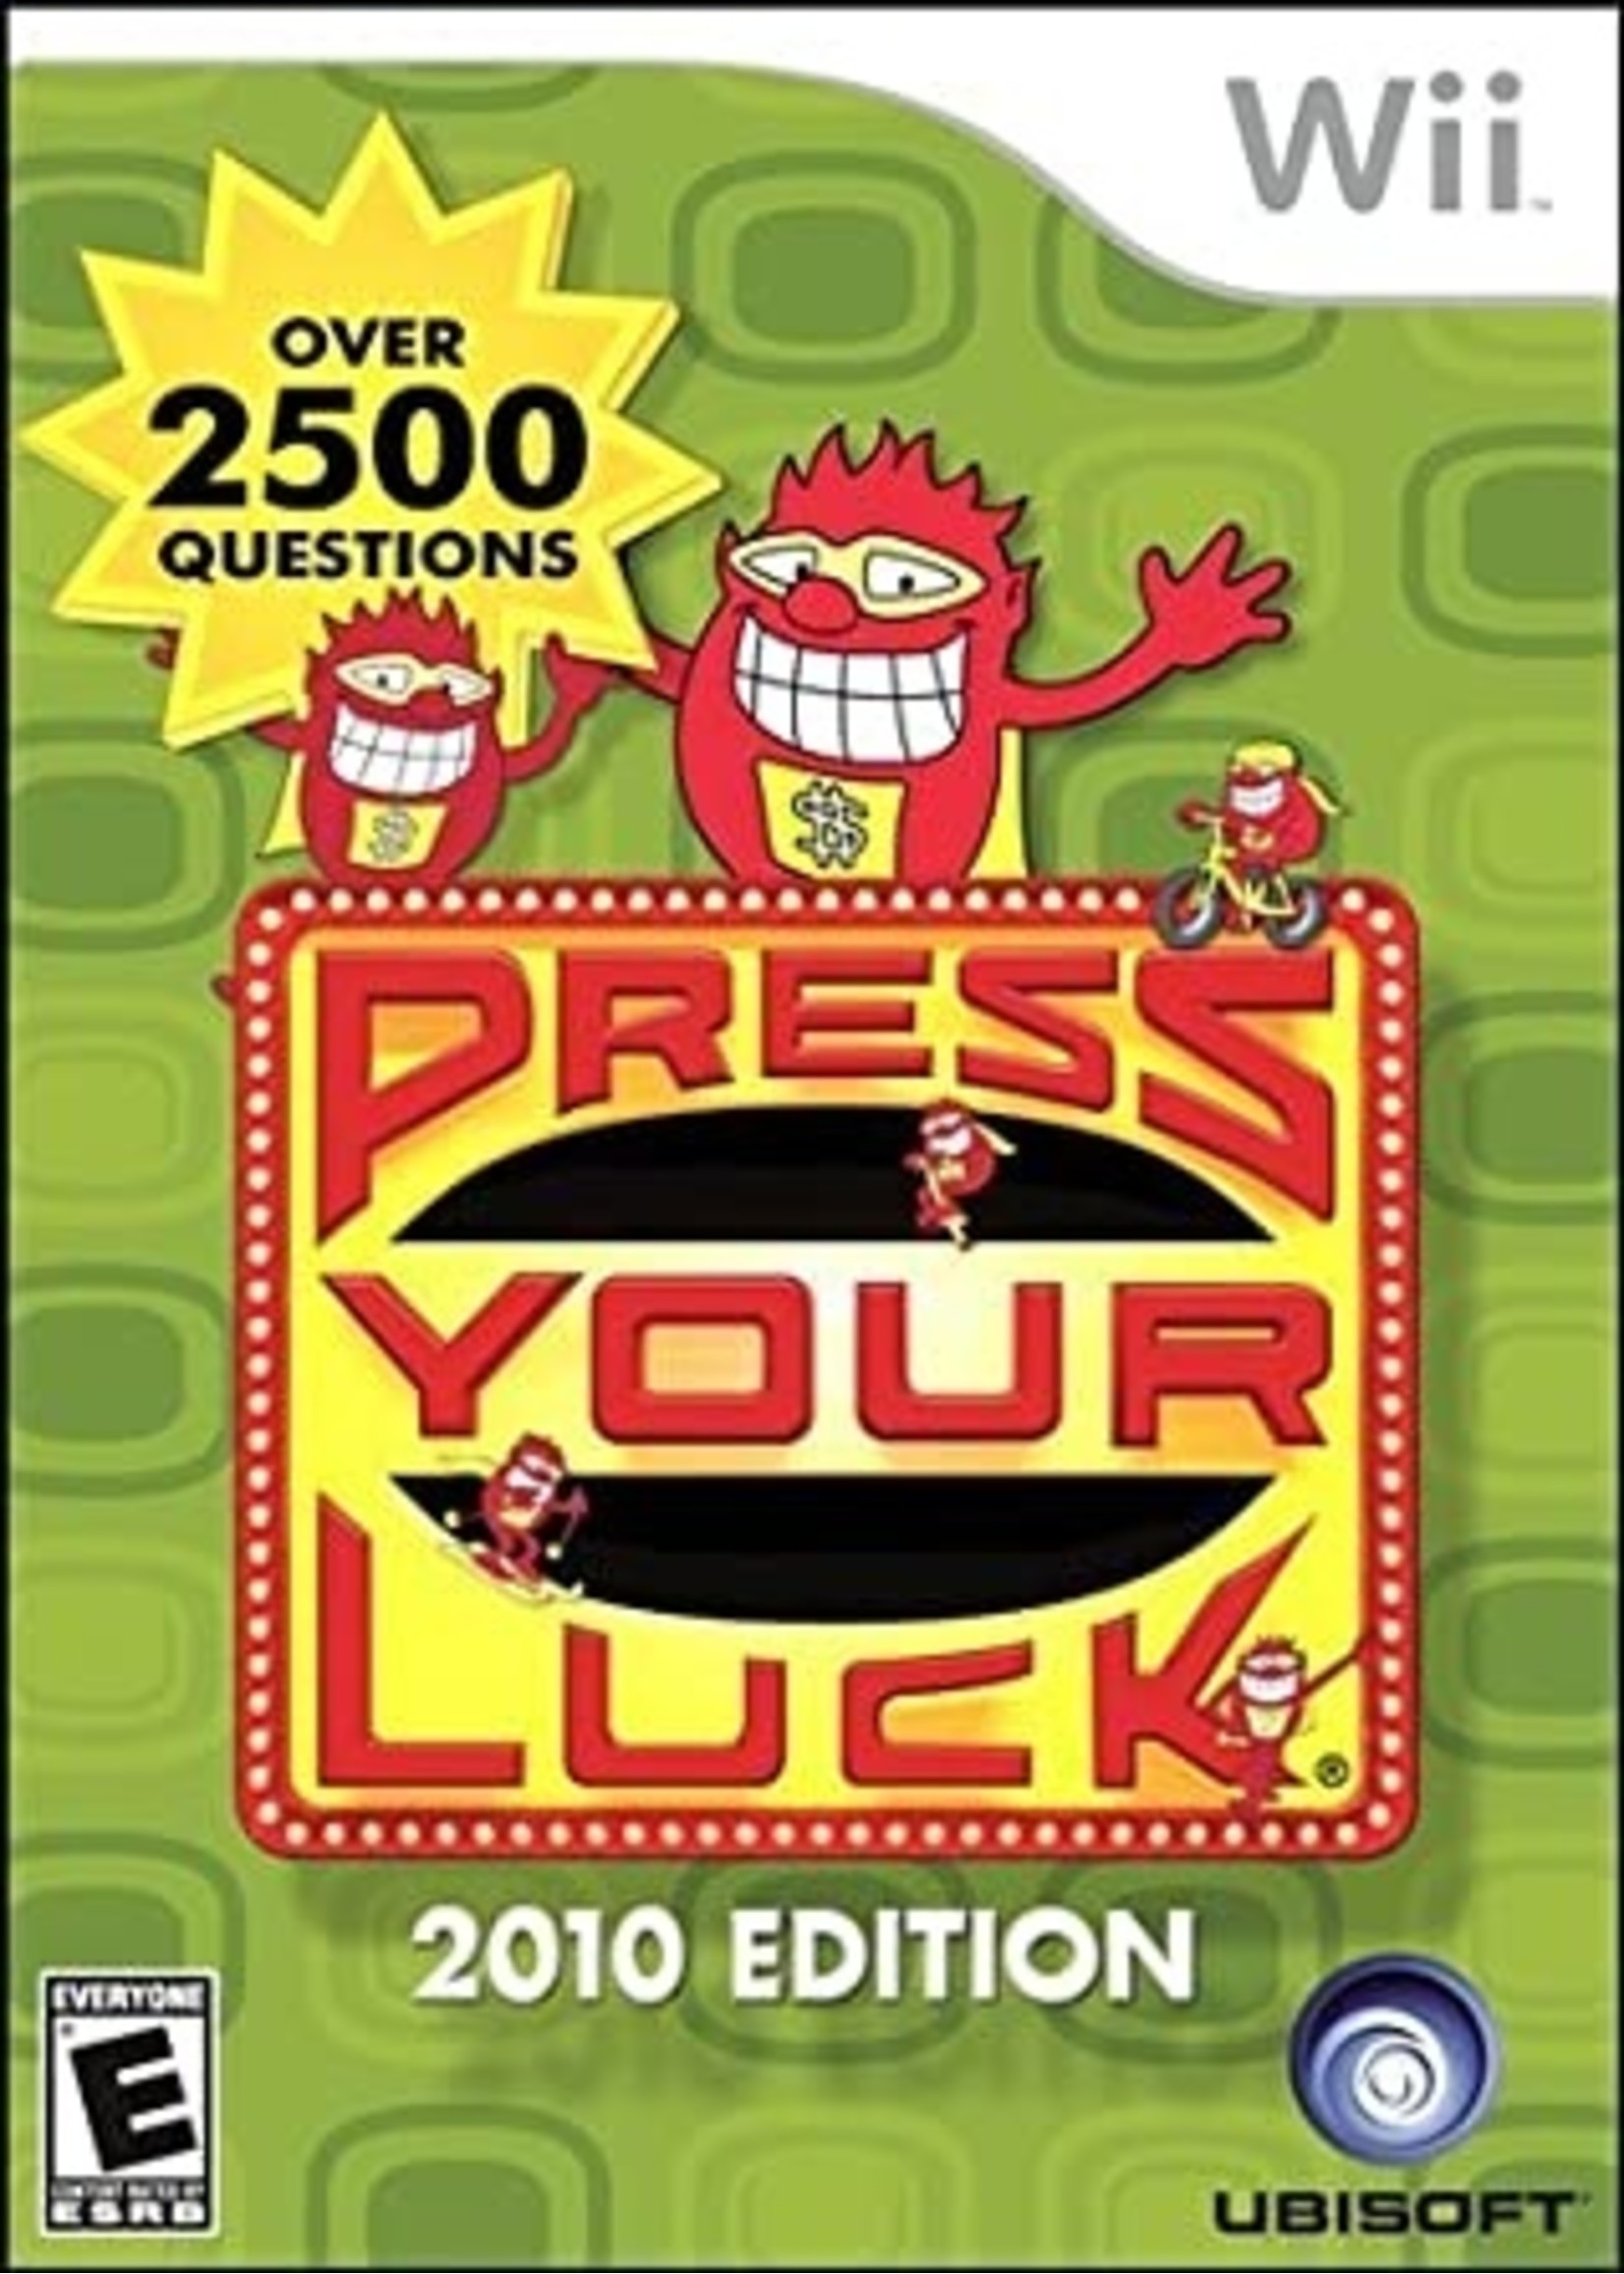 Nintendo Wii Press Your Luck: 2010 Edition